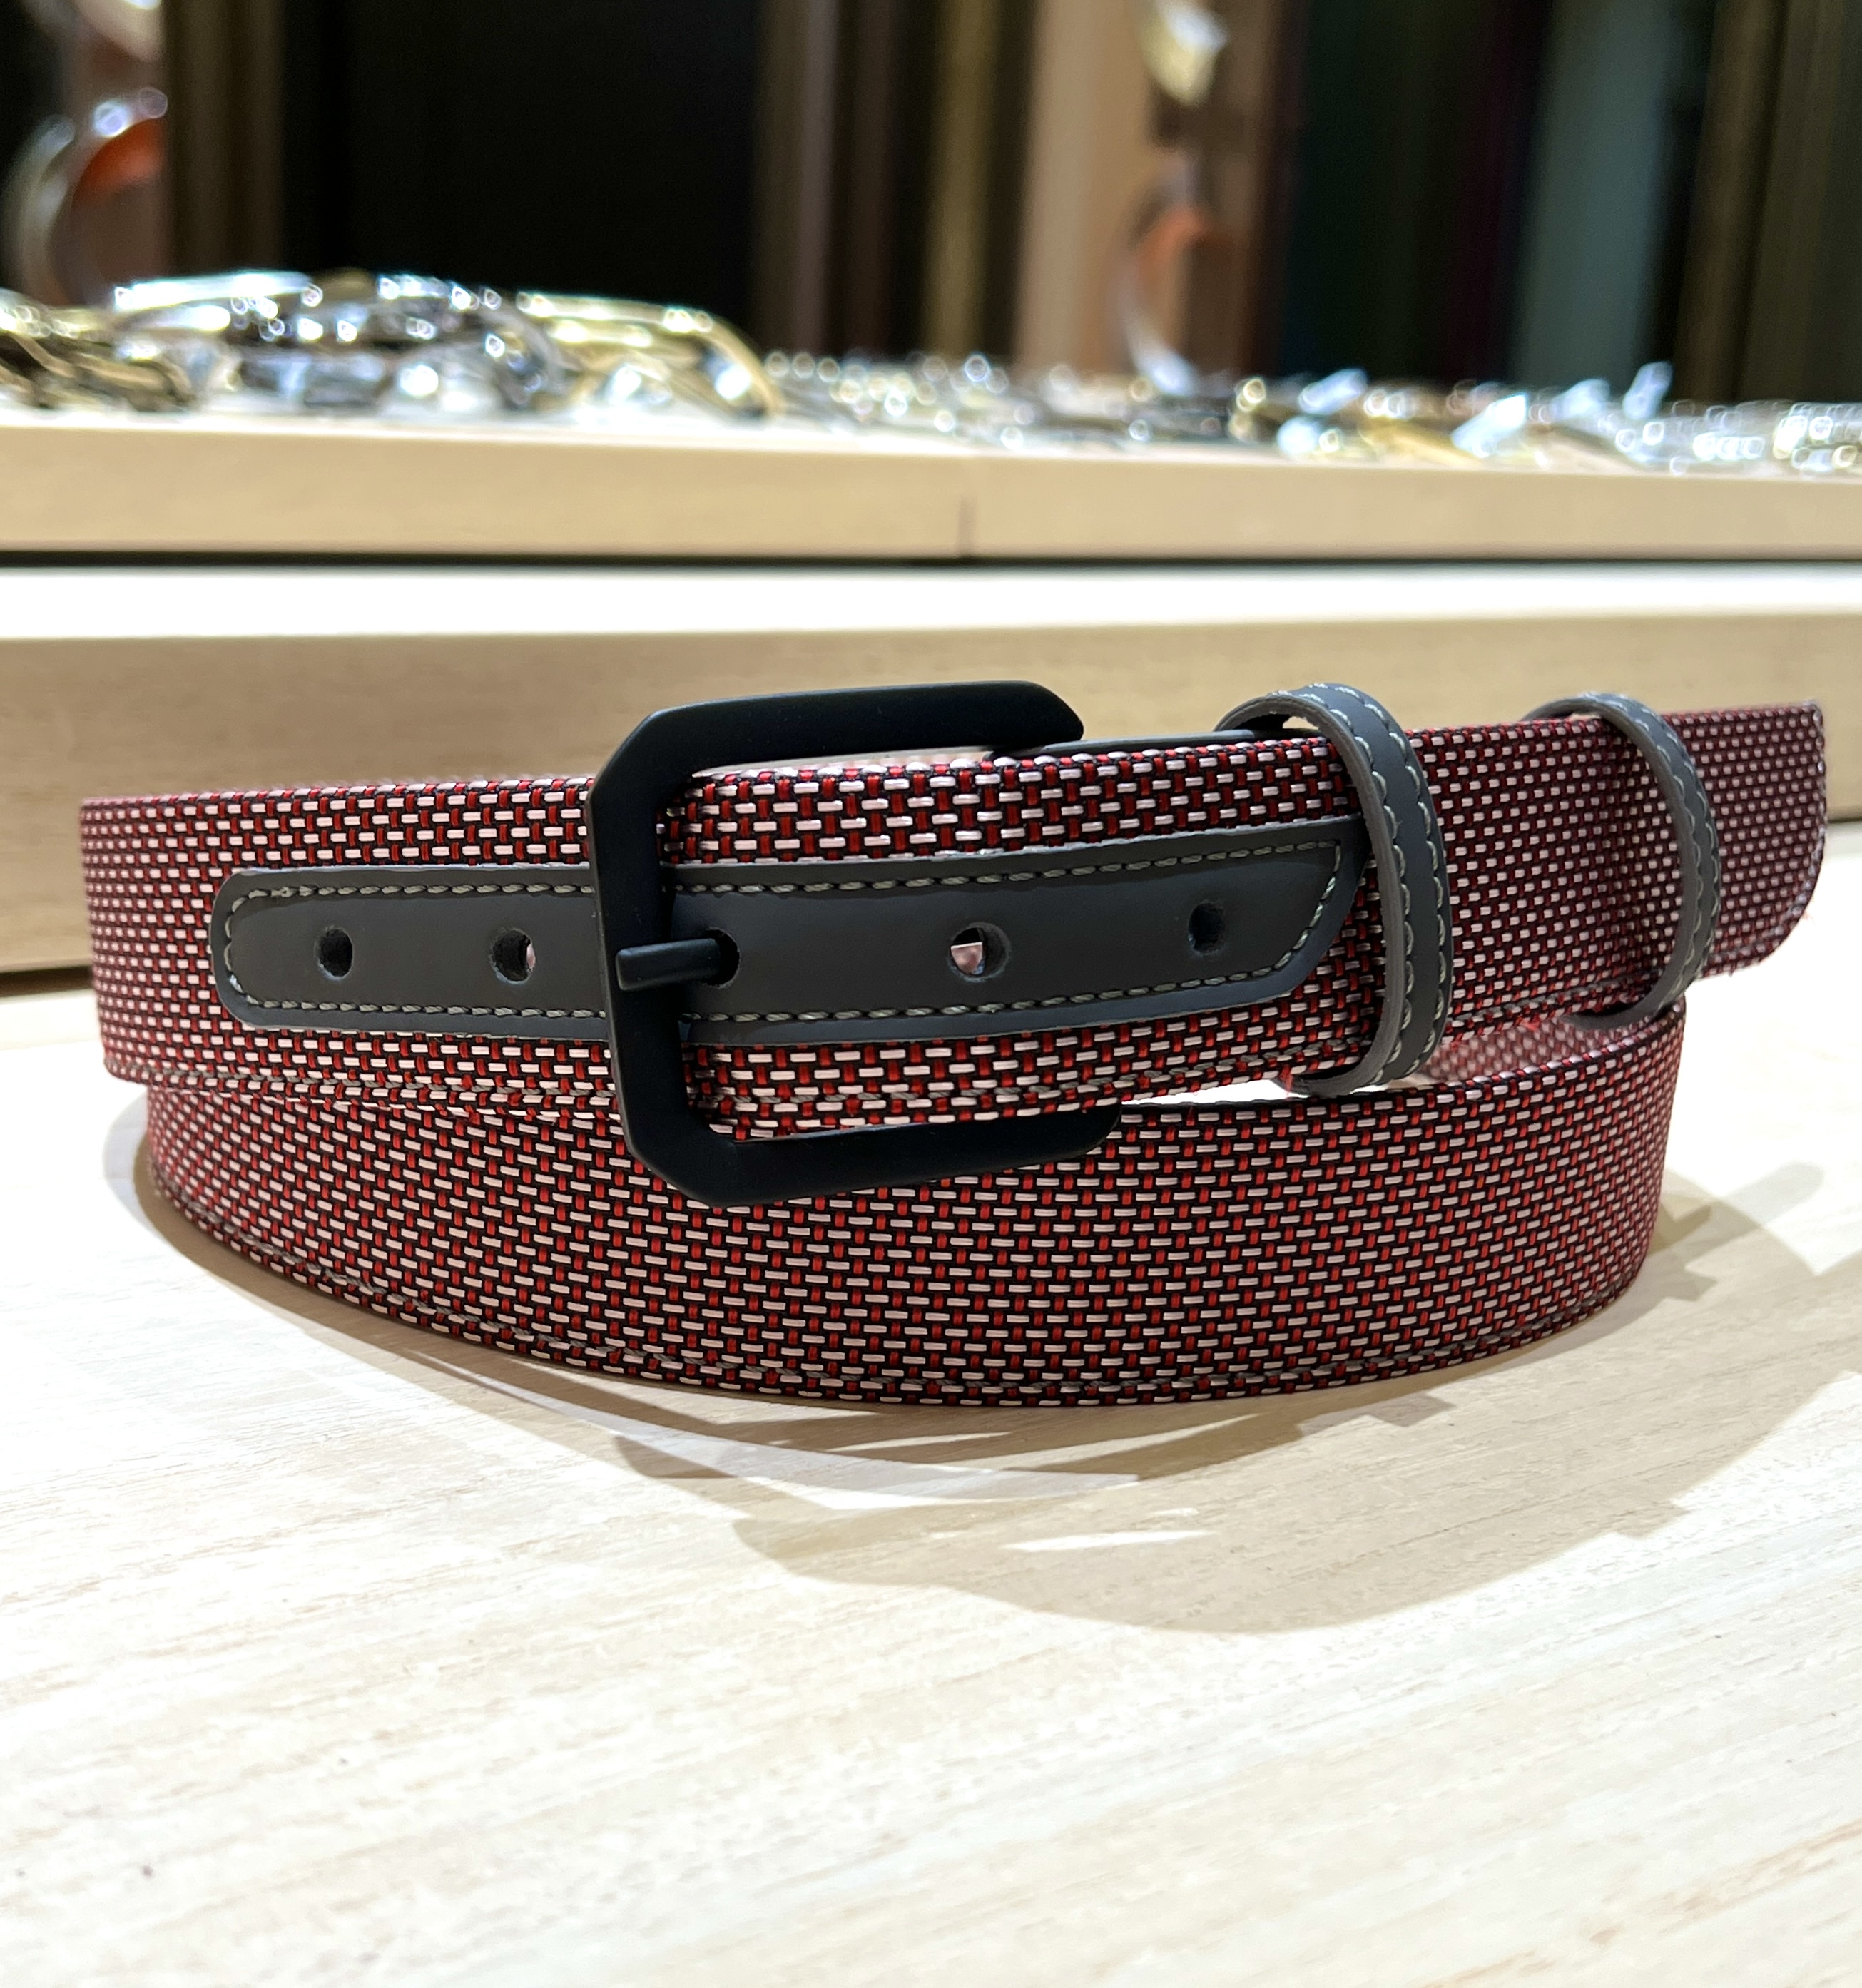 New colour of the Performance belt